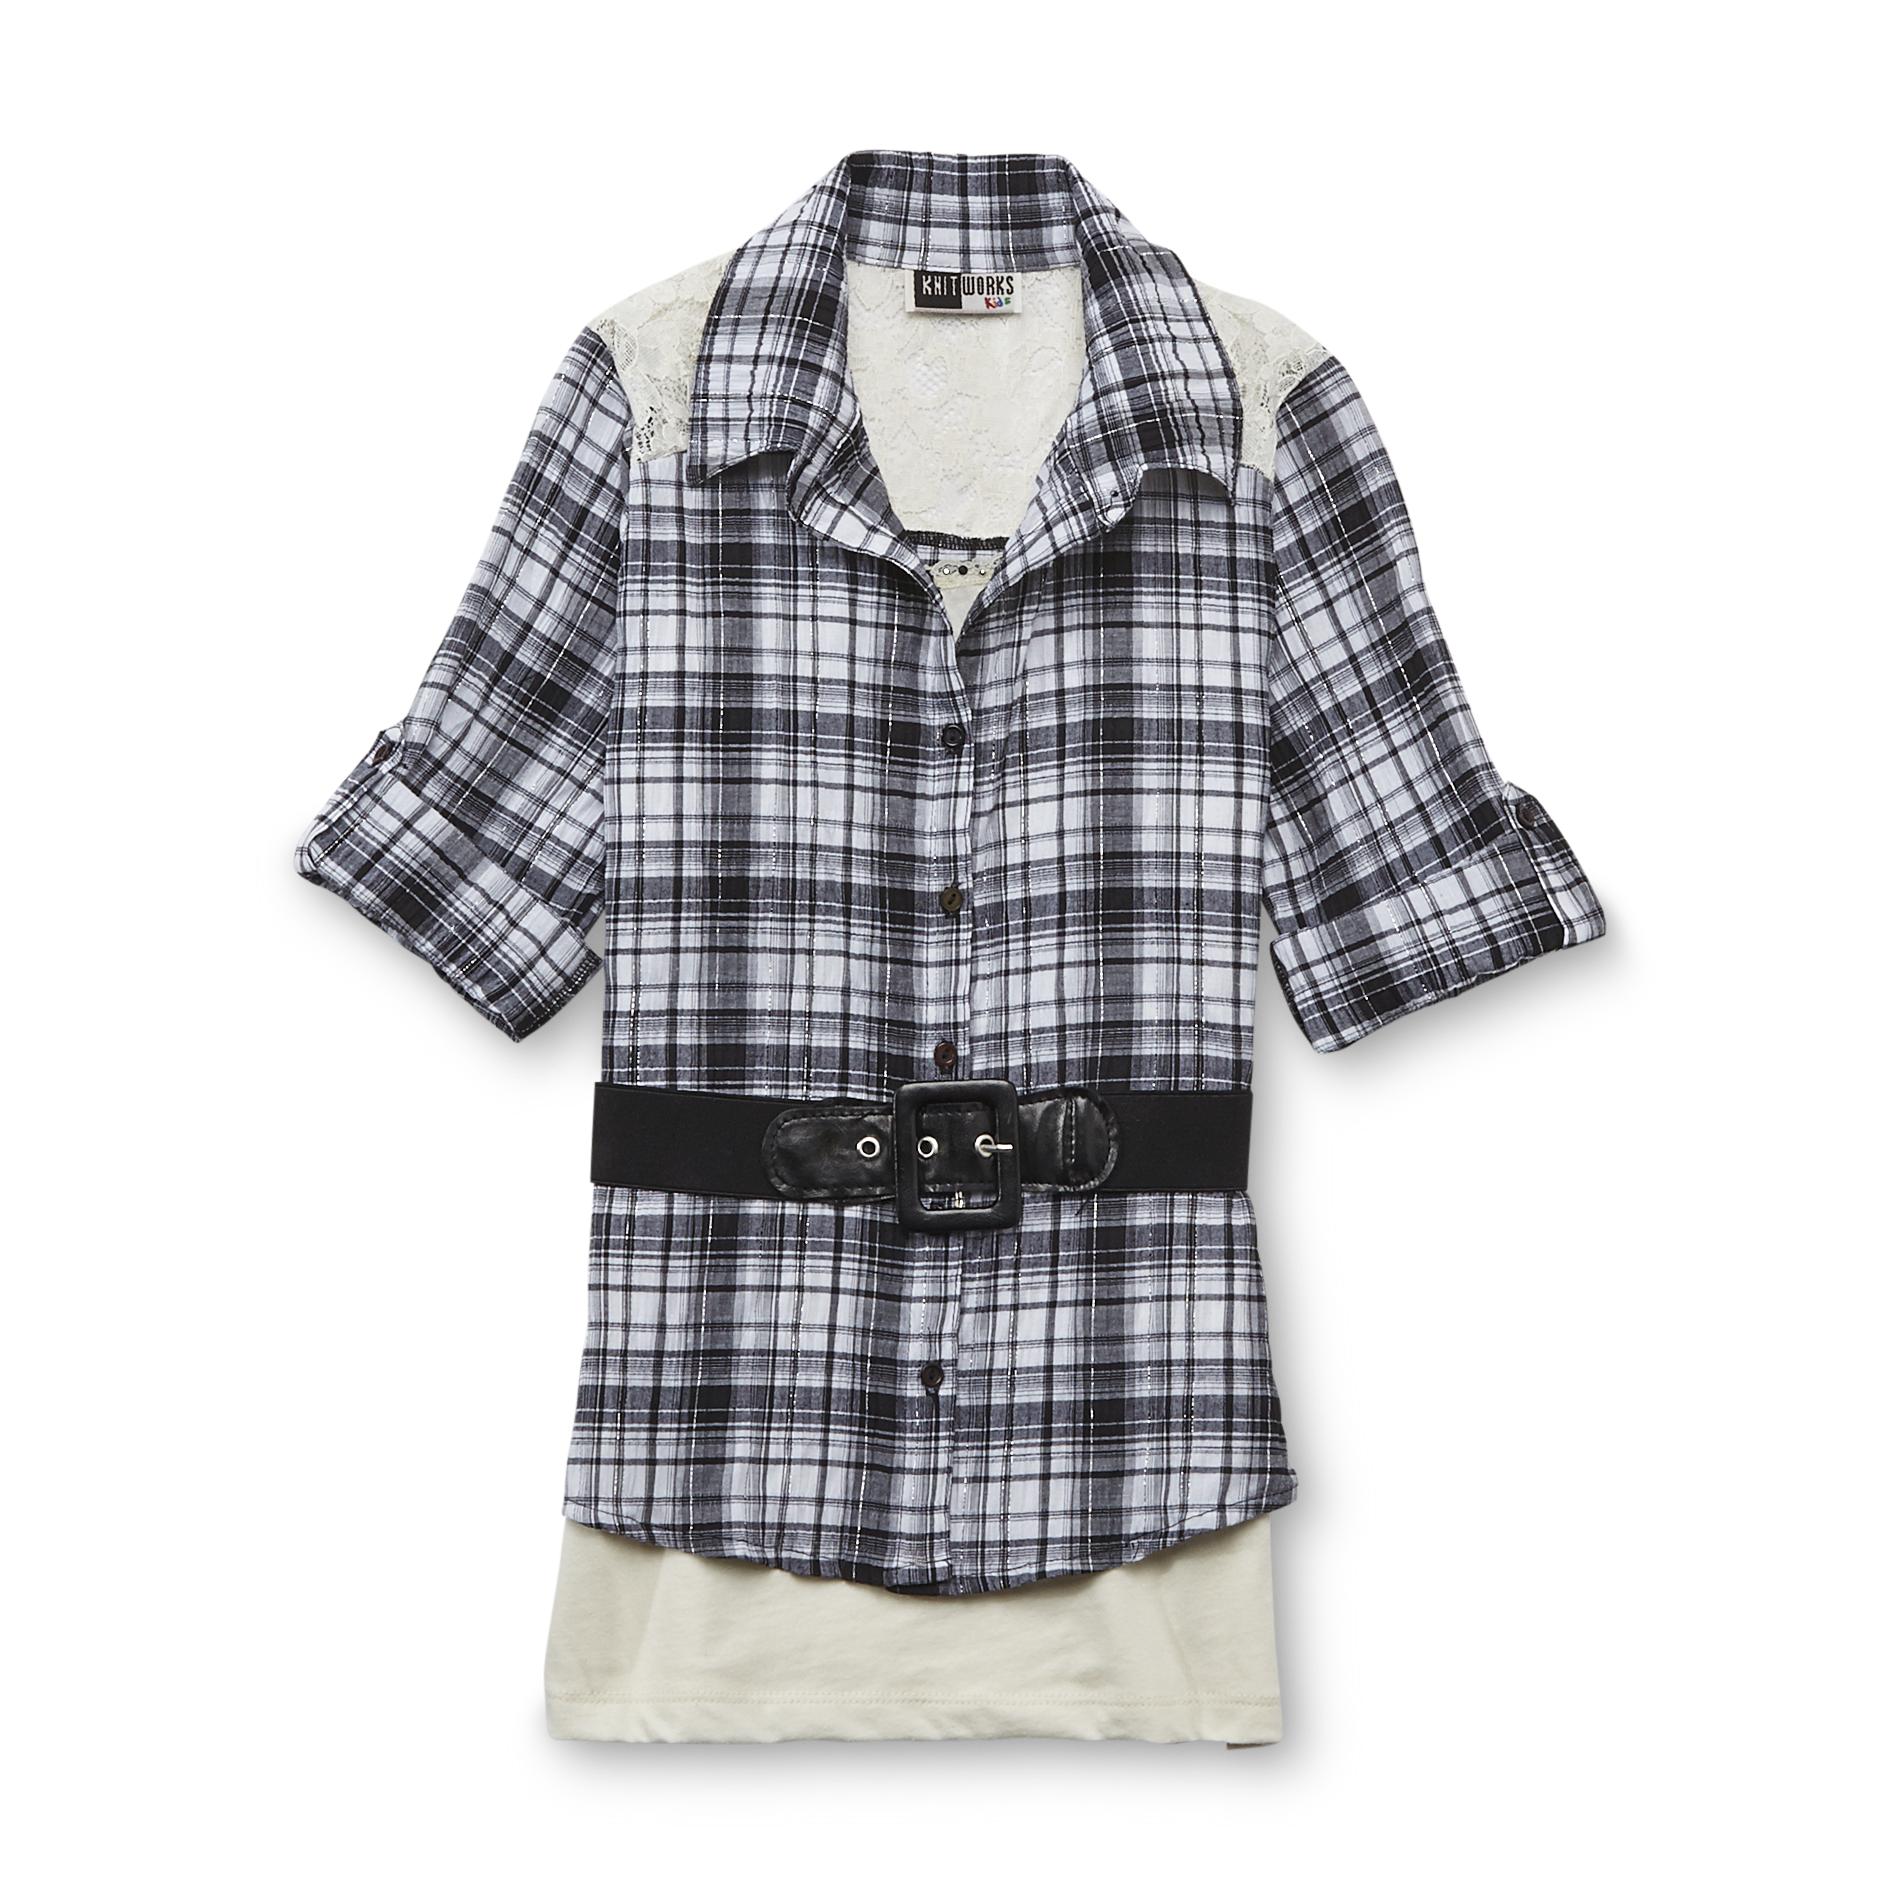 Knitworks Kids Girl's Layered-Look Top & Belt - Plaid